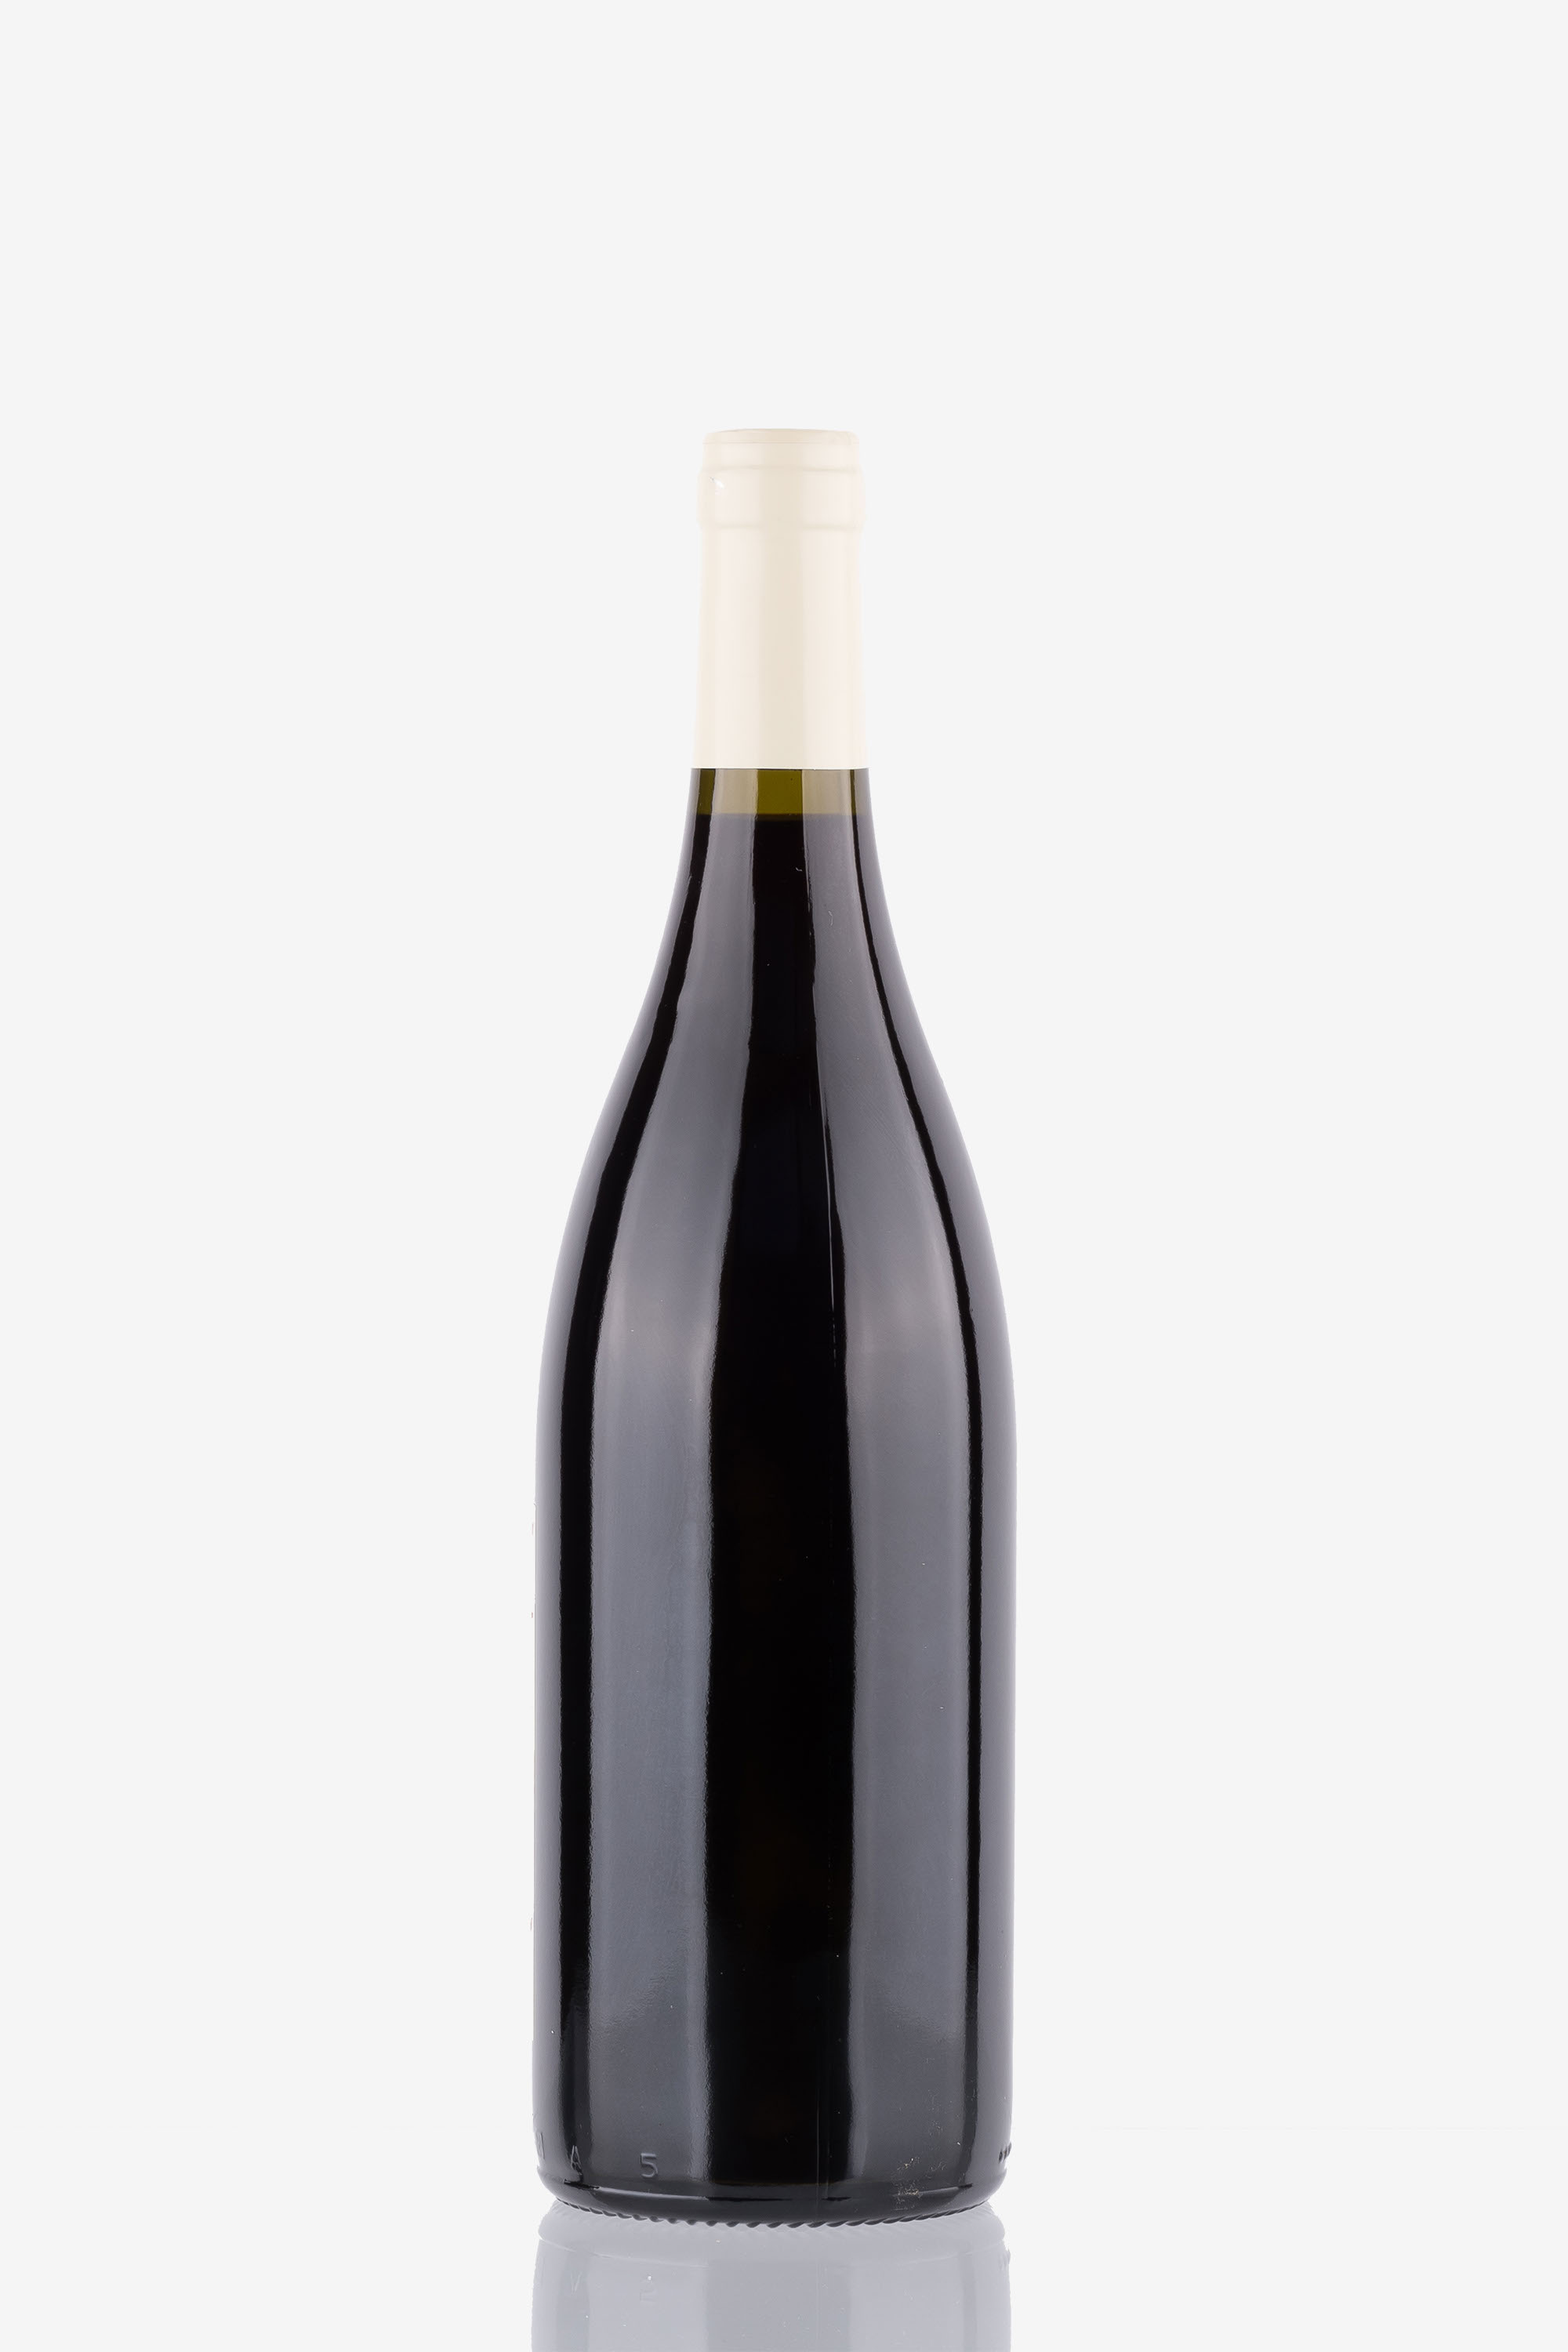 selected wine variant rear image